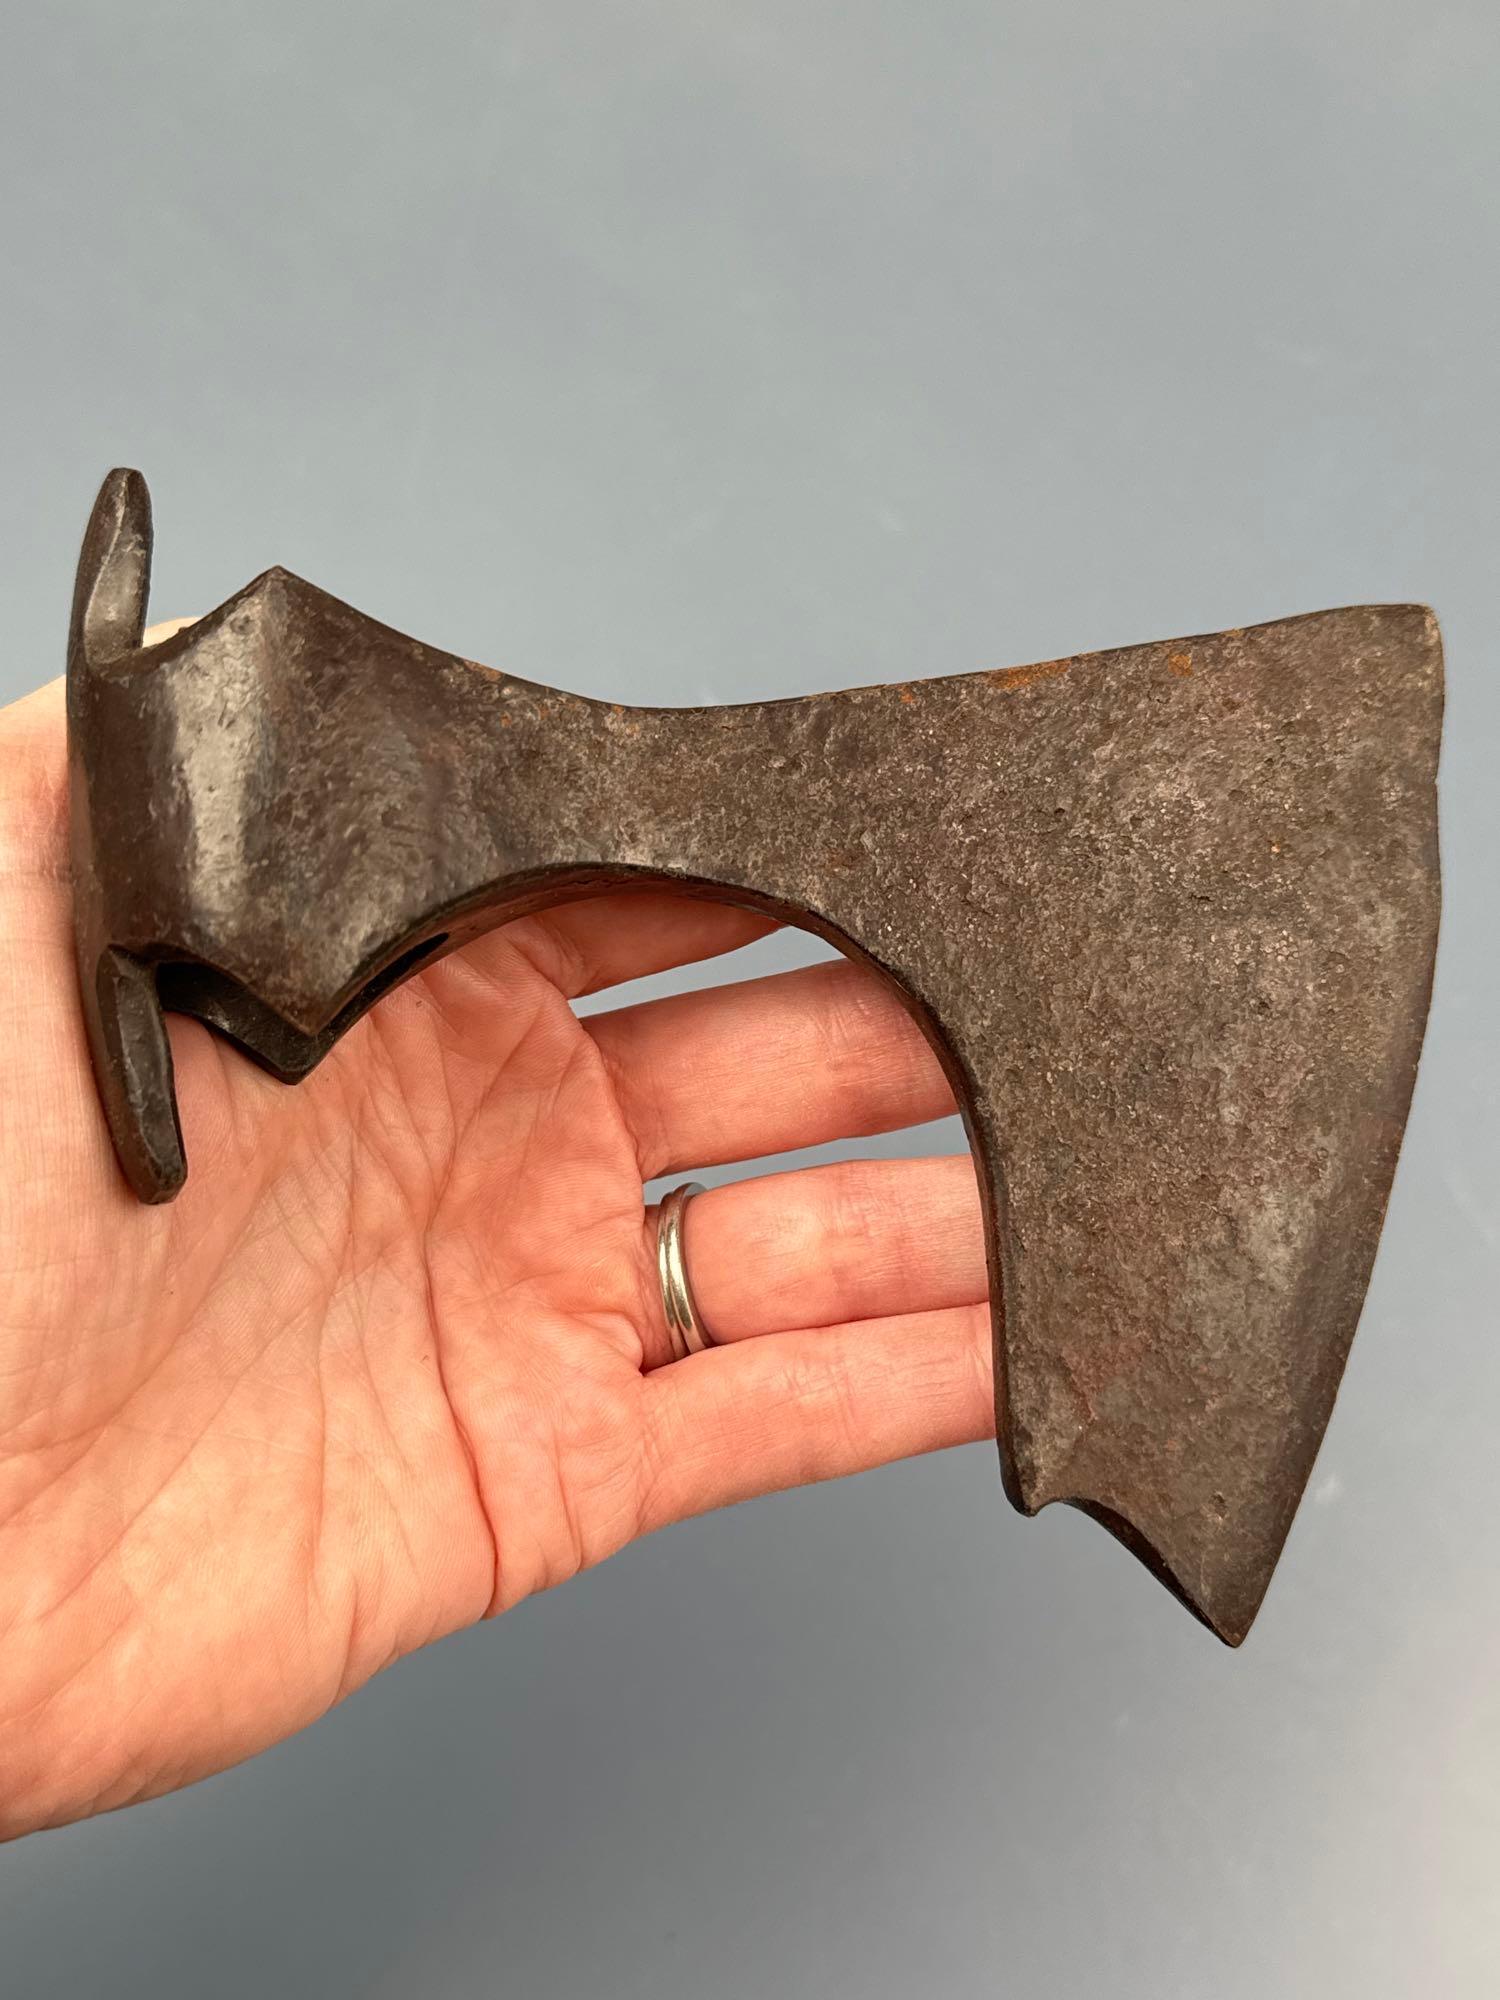 5 3/8" Viking Axe, Estimated 900-1100 AD, From a British Collection formed in 1990's, Ex: Hanning Co